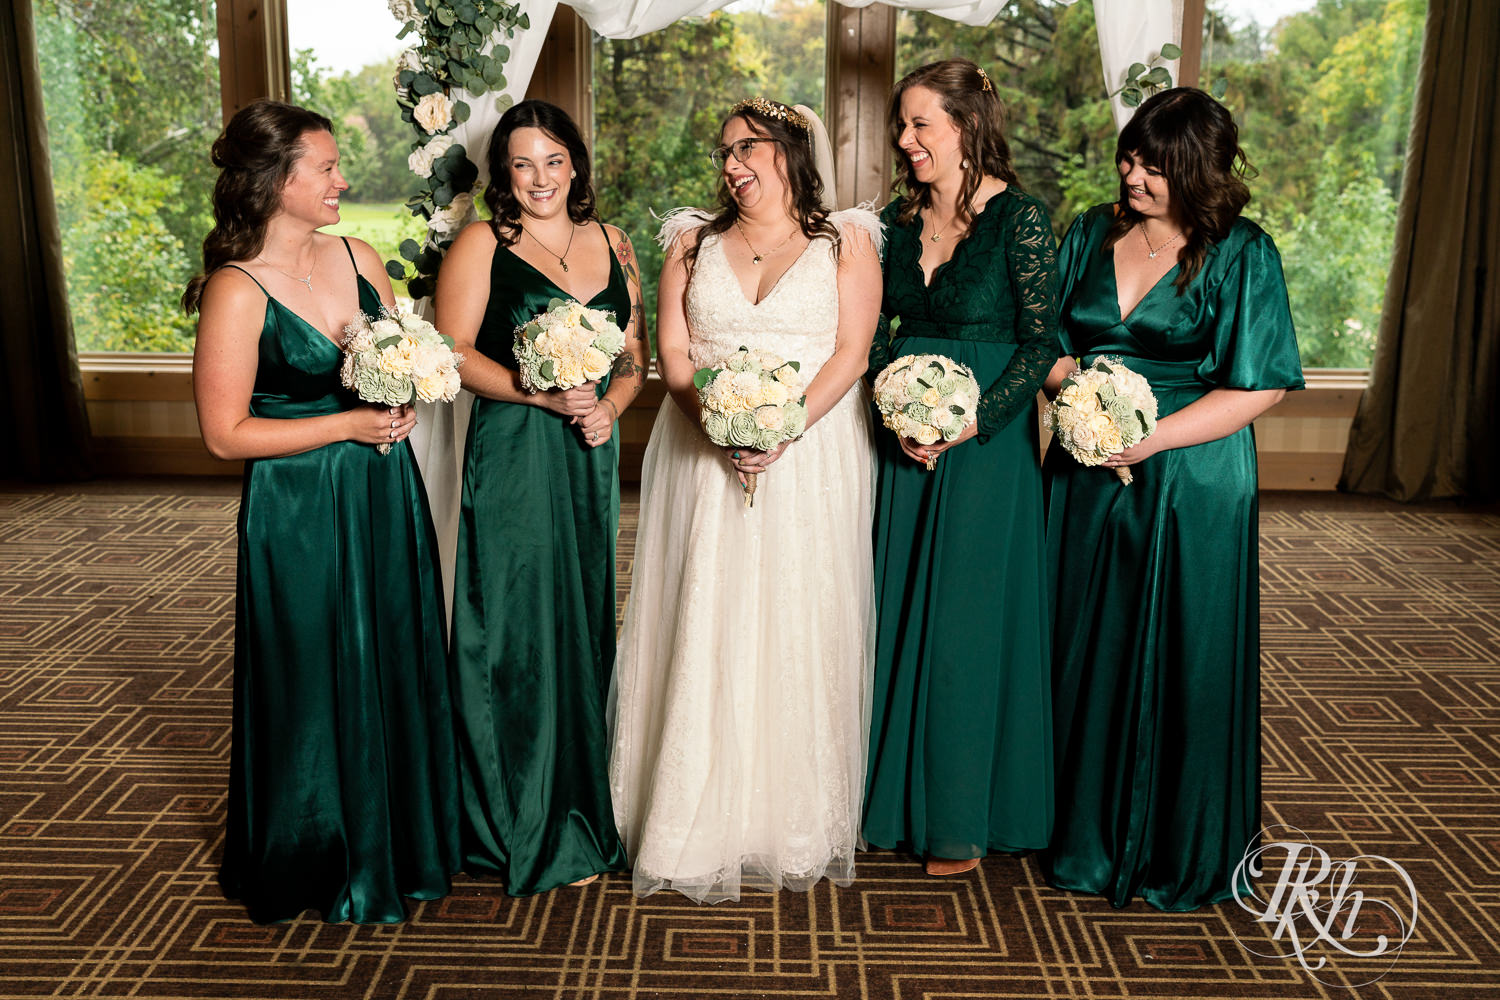 Bride smiles with wedding party at Bunker Hills Event Center in Coon Rapids, Minnesota.